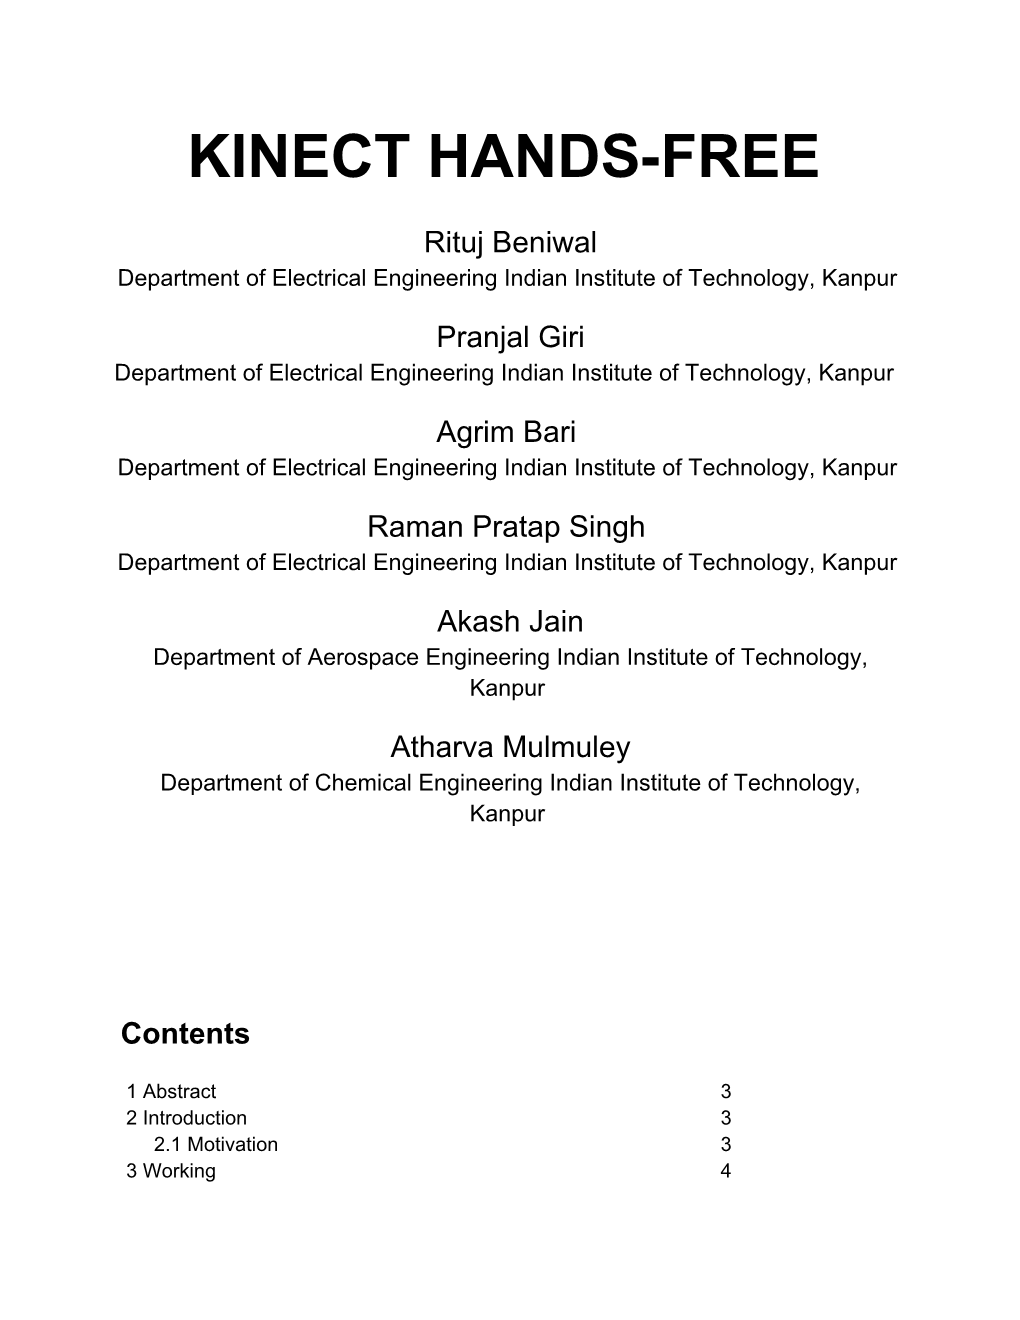 Kinect Hands-Free